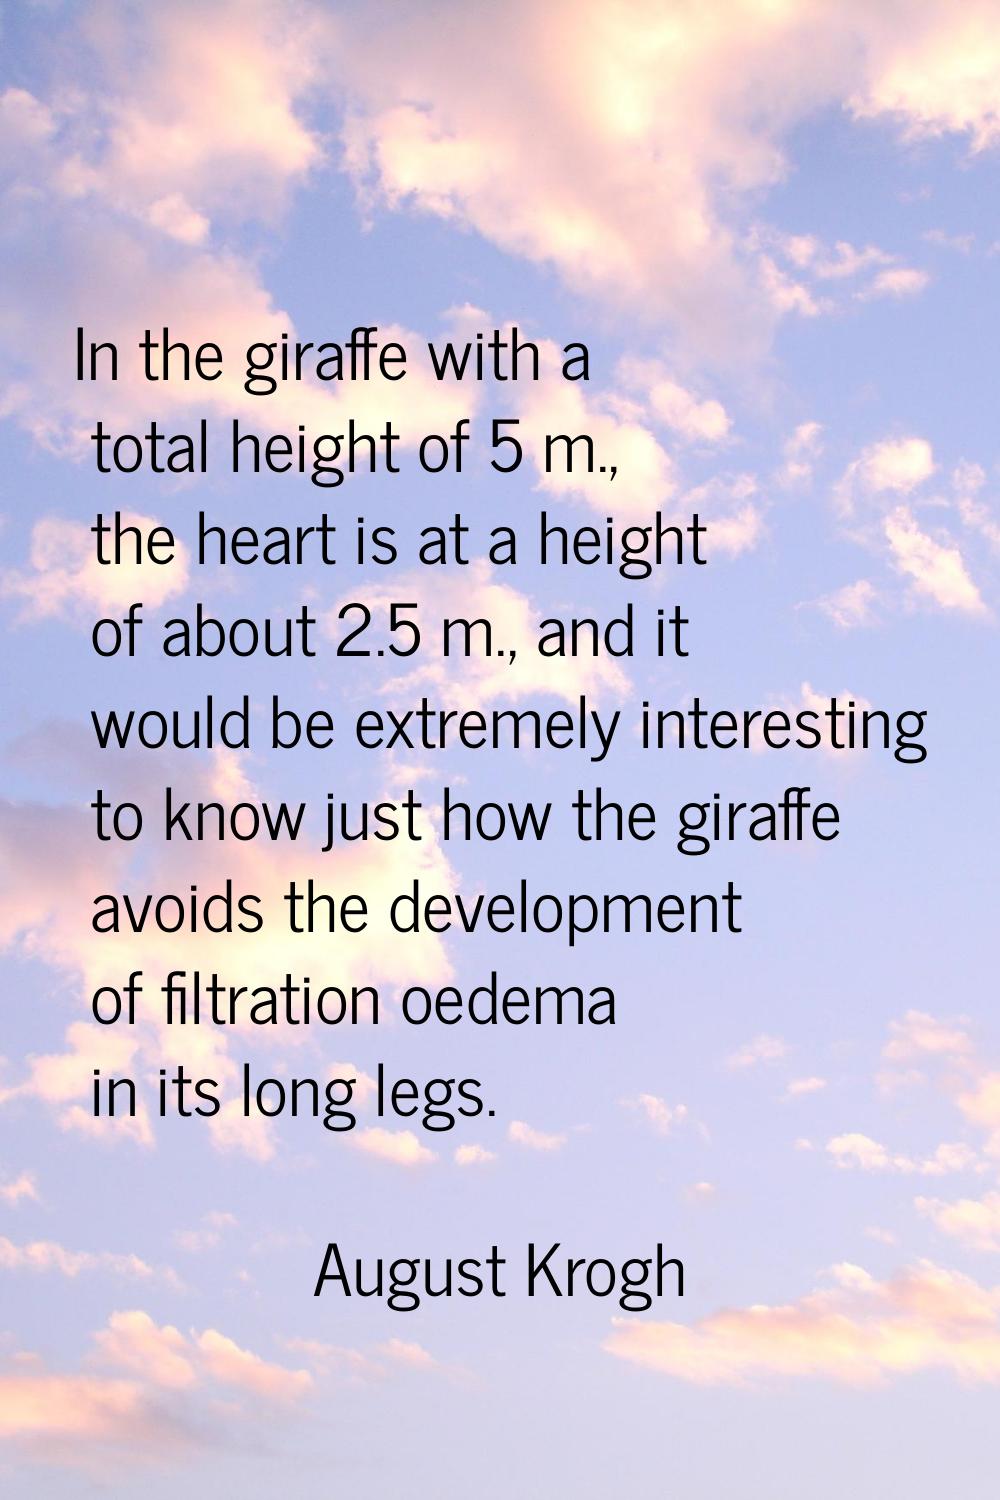 In the giraffe with a total height of 5 m., the heart is at a height of about 2.5 m., and it would 